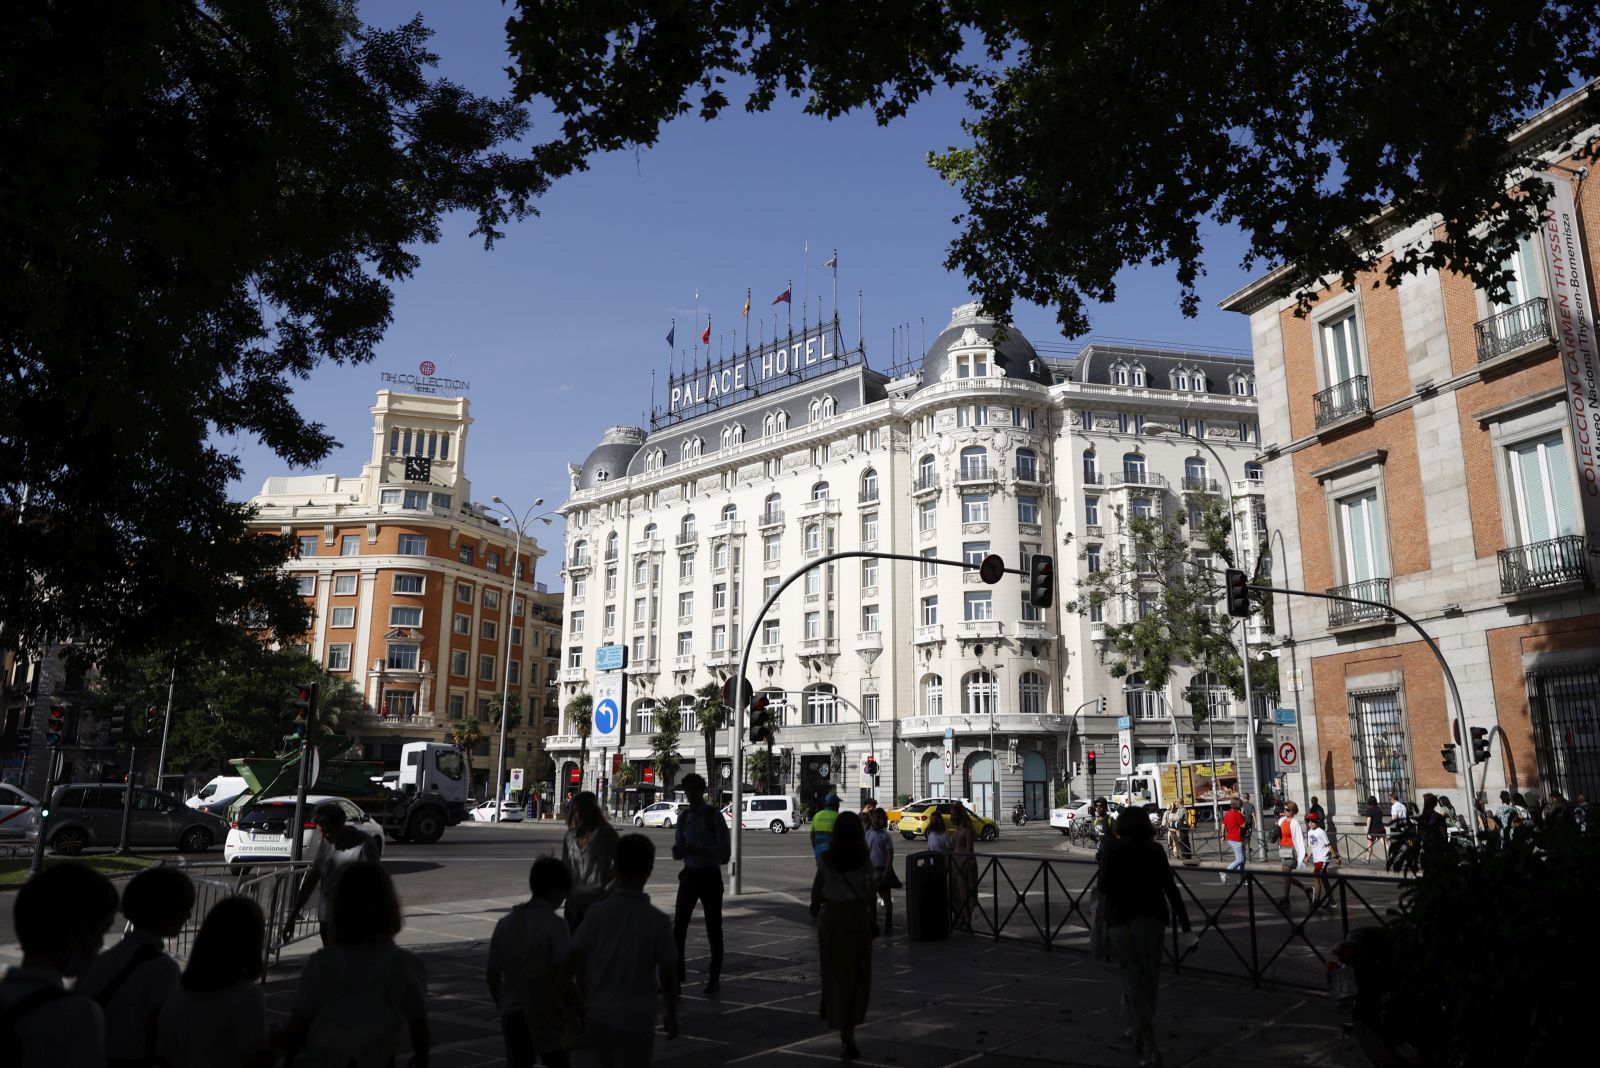 epa10024989 An exterior view of the luxurious Palace Hotel (C) in Madrid, Spain, 21 June 2022. Hotel occupancy is close to 100 percent in the Spanish capital ahead of the upcoming NATO summi, that is taking place here on 29 and 30 June 2022. The leaders of the North Atlantic Treaty Organization (NATO) are gathering in Madrid to 'set NATO’s strategic direction for the next decade and beyond, ensuring that the Alliance will continue to adapt to a changing world and keep its one billion people safe', the NATO announced on the organization's website.  EPA/MARISCAL